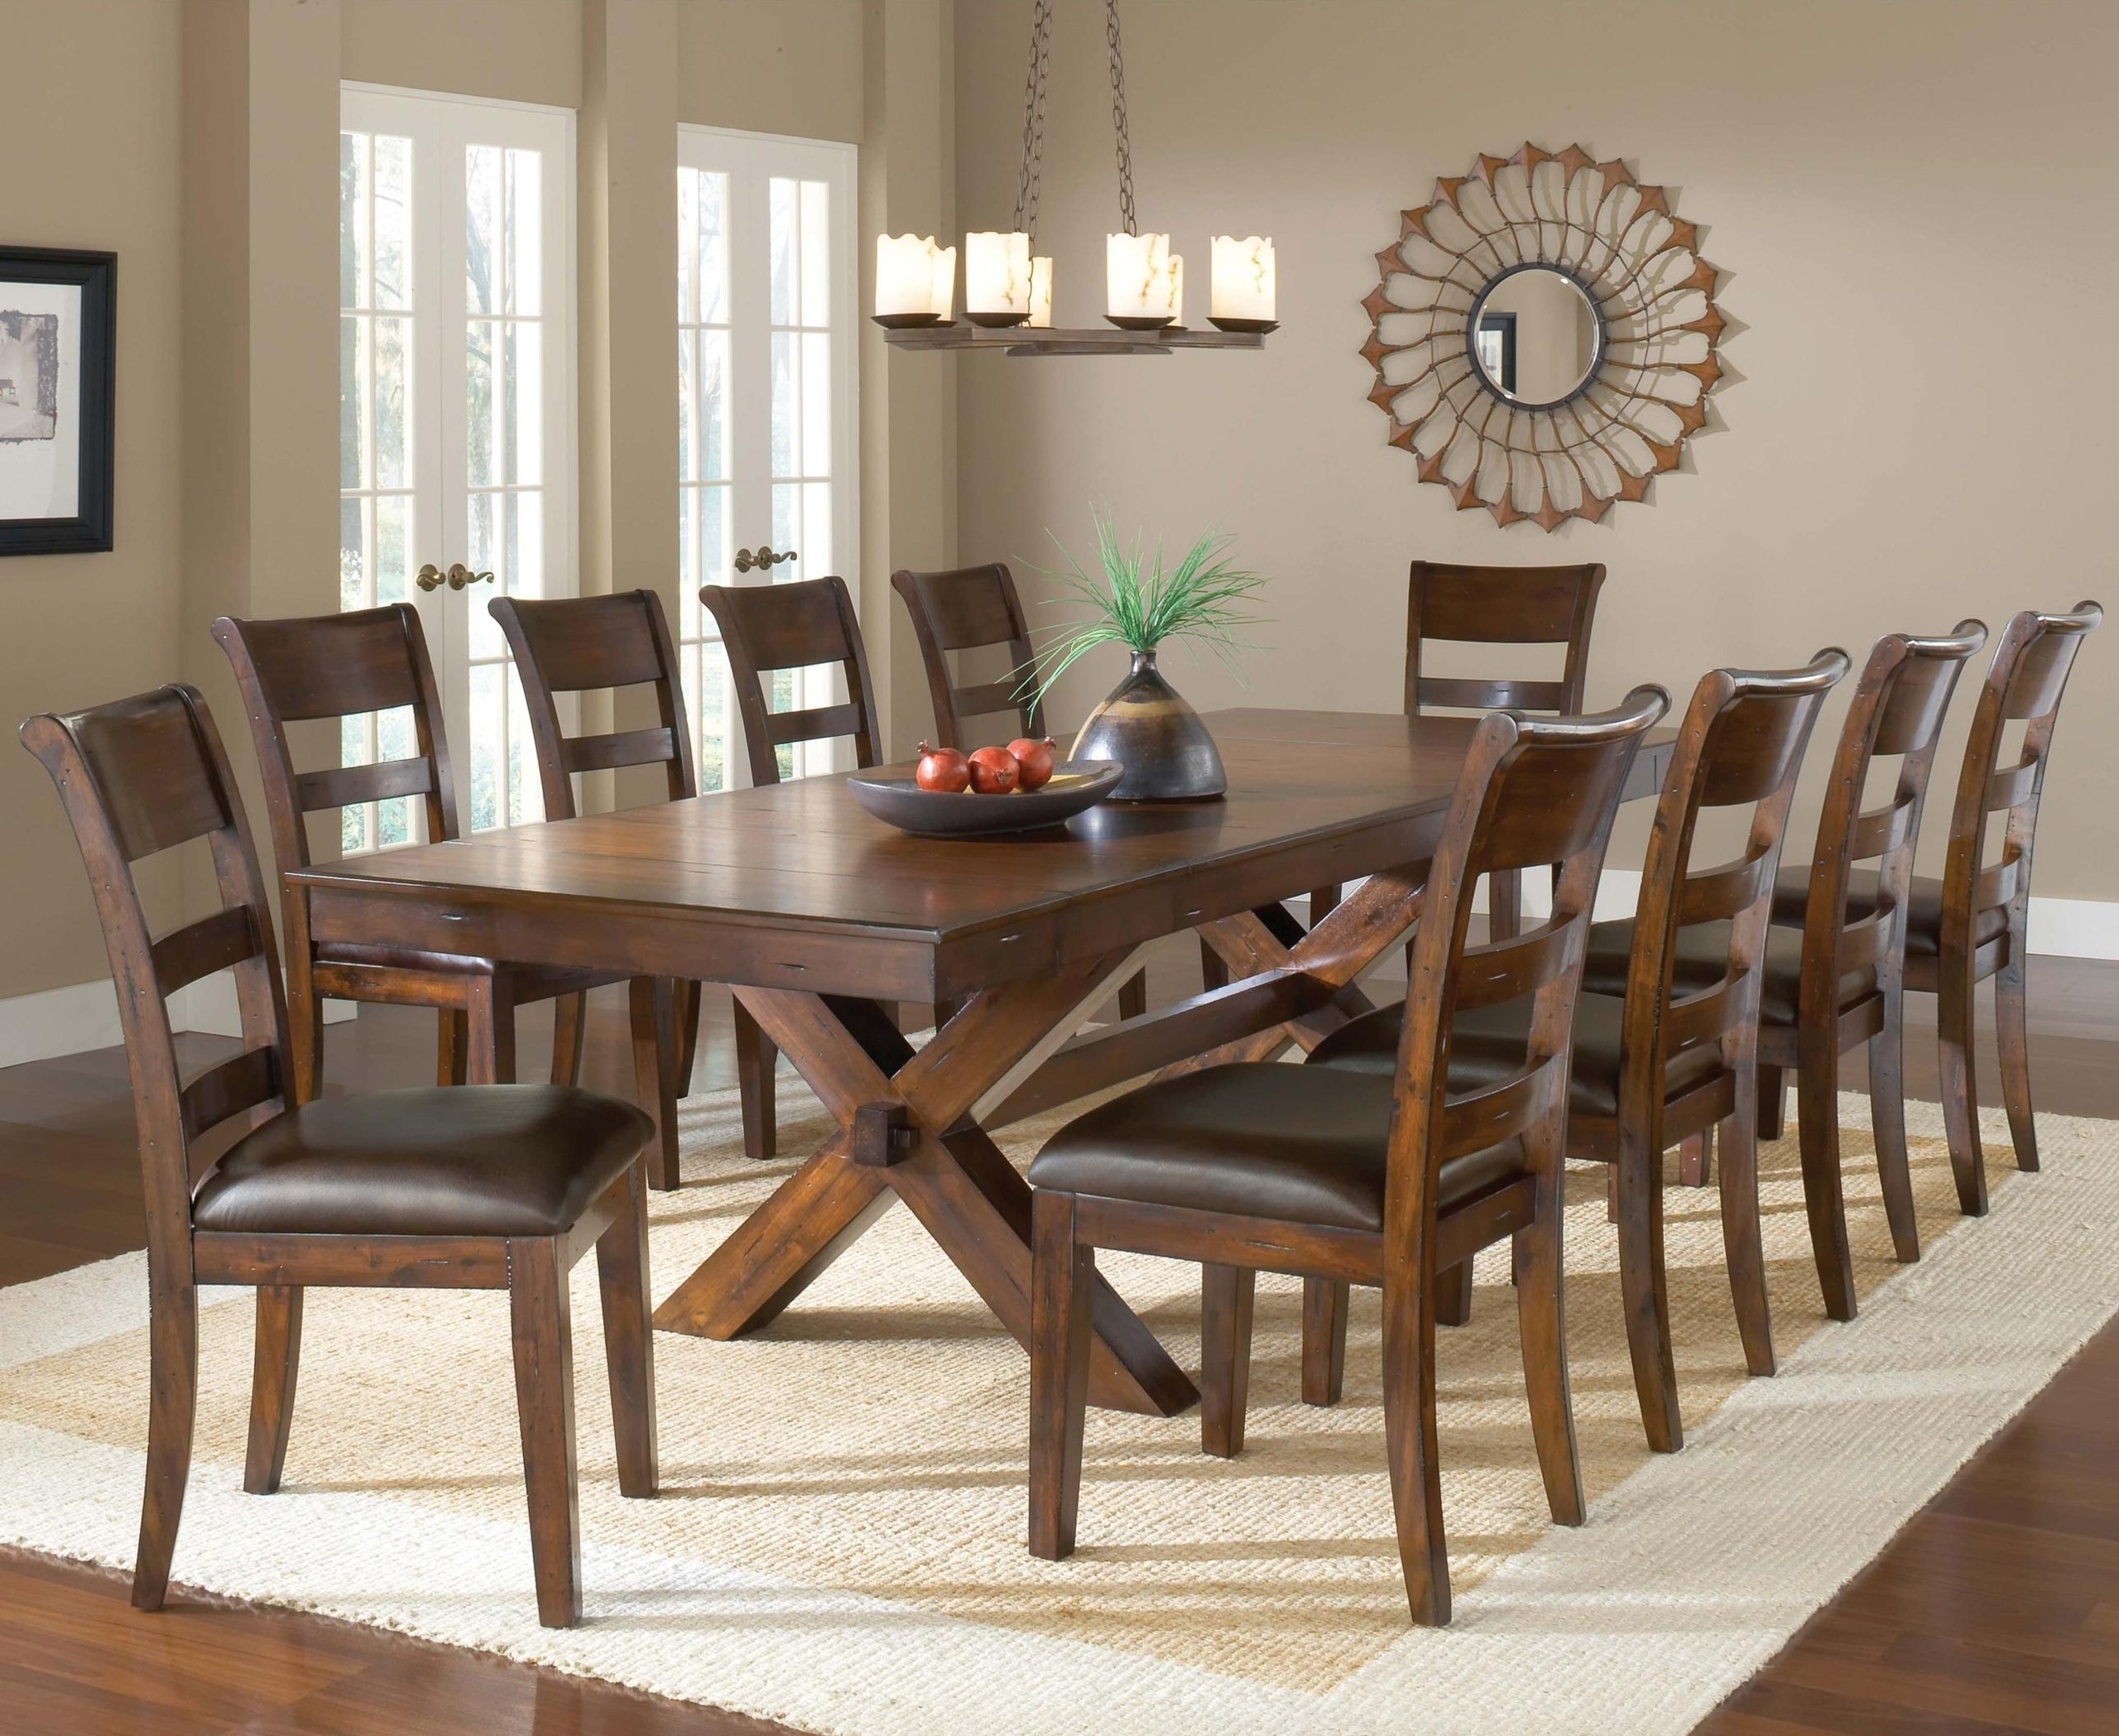 Best Oval Dining Tables For 10 Person Ideas On Foter